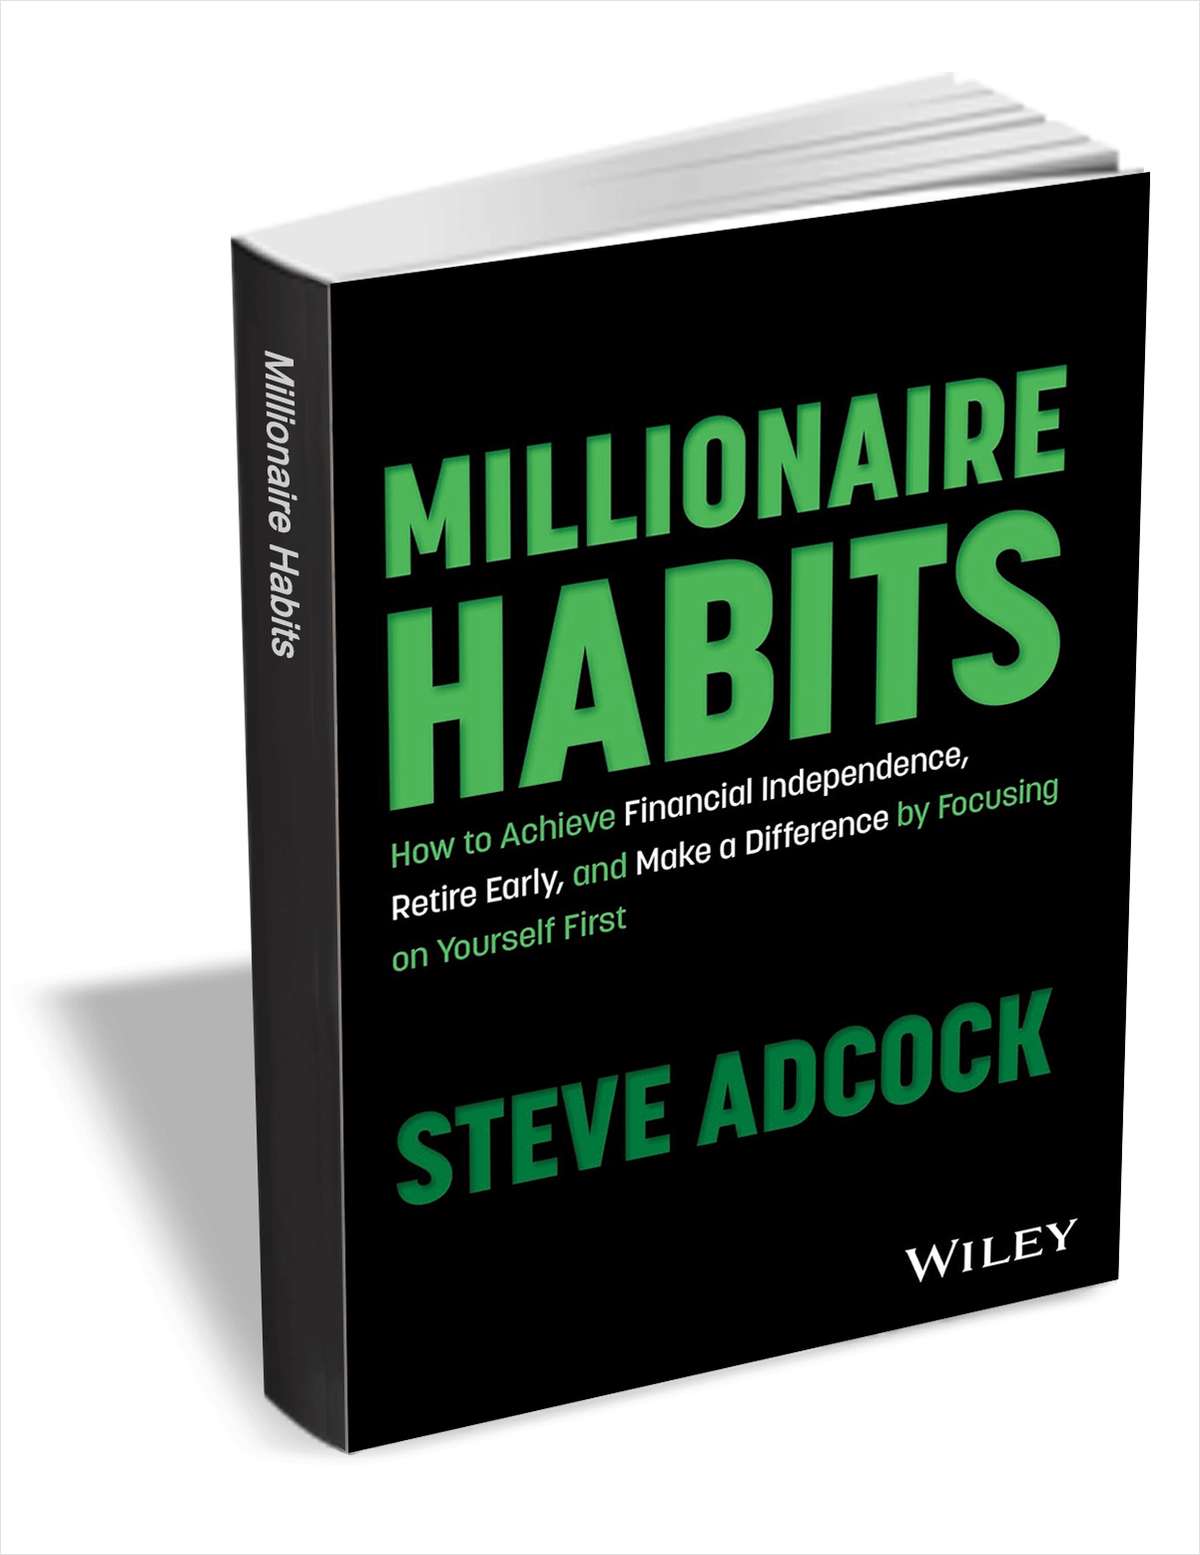 Millionaire Habits: How to Achieve Financial Independence, Retire Early, and Make a Difference by Focusing on Yourself First ($18.00 Value) FREE for a Limited Time